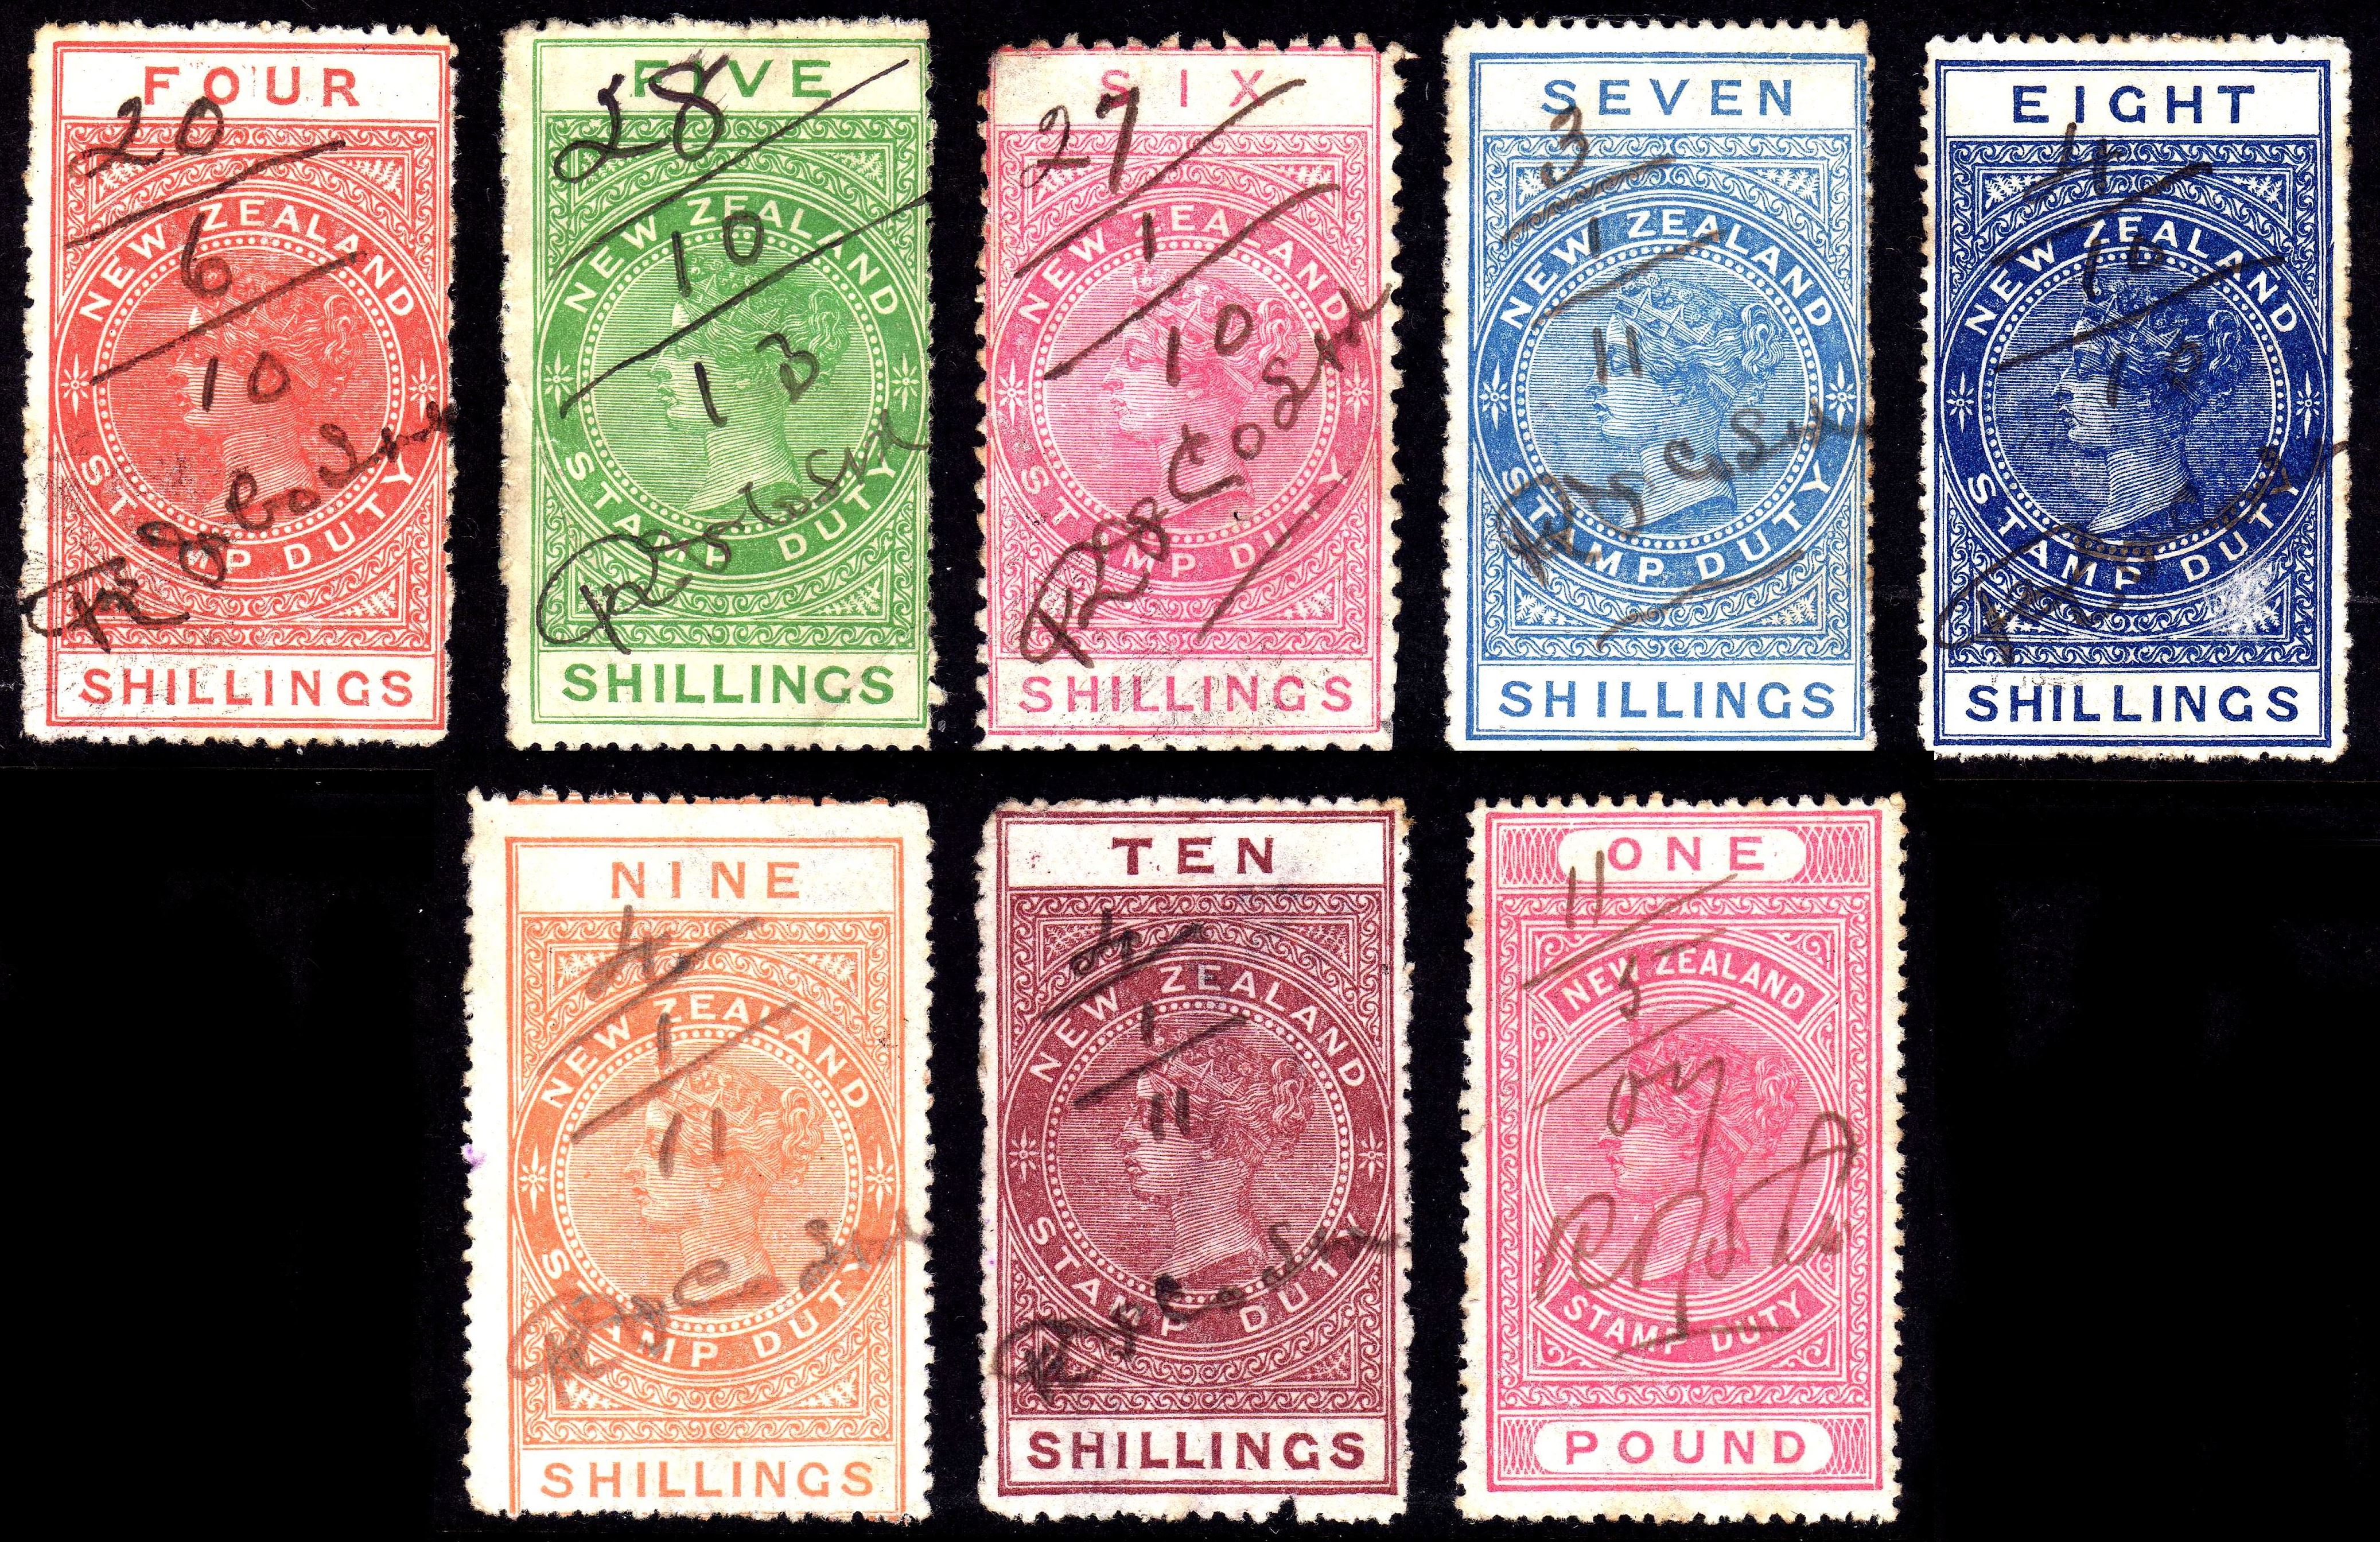 New Zealand stamp duty stamps